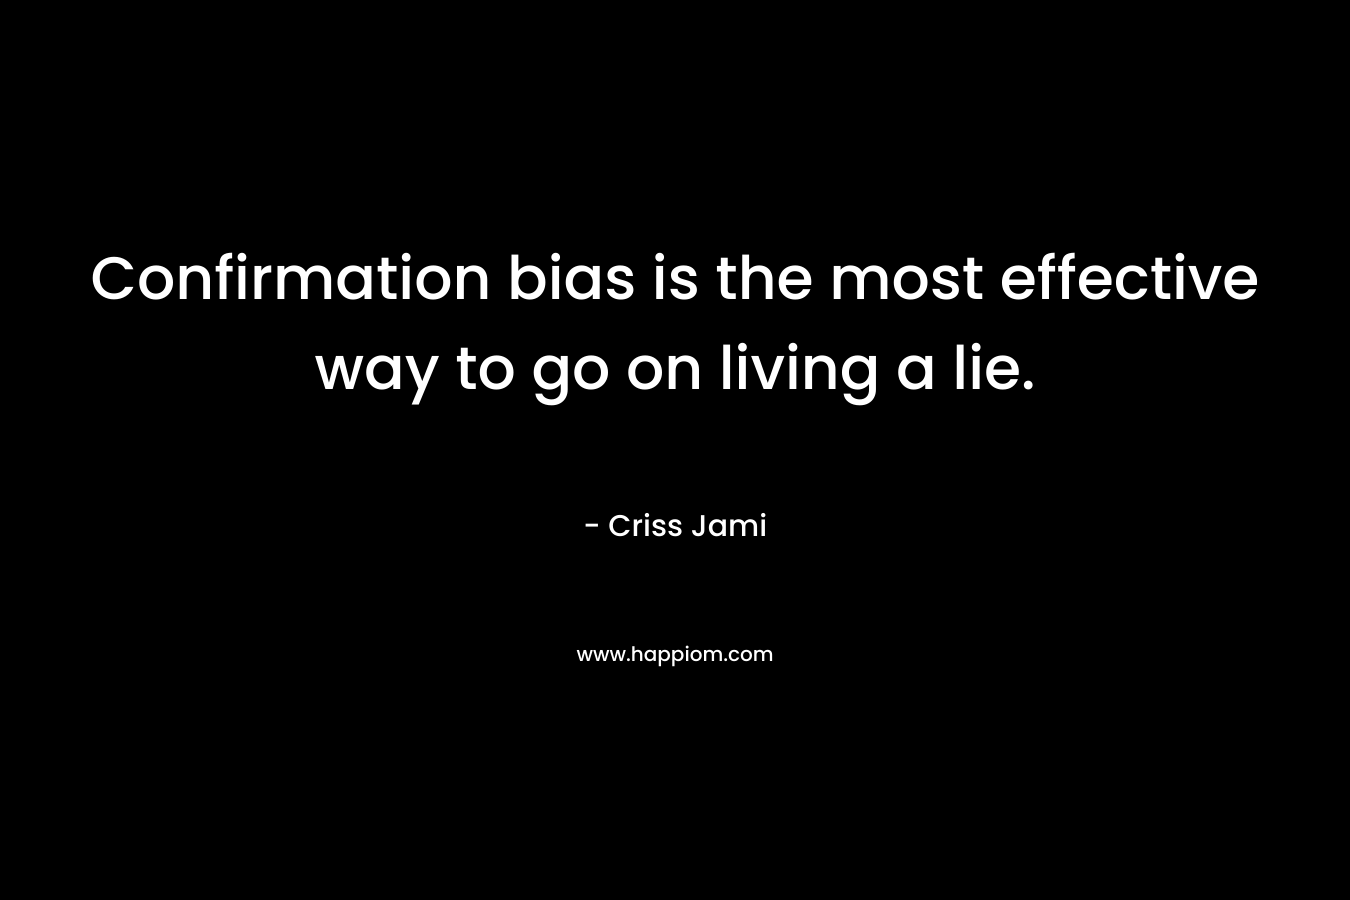 Confirmation bias is the most effective way to go on living a lie.